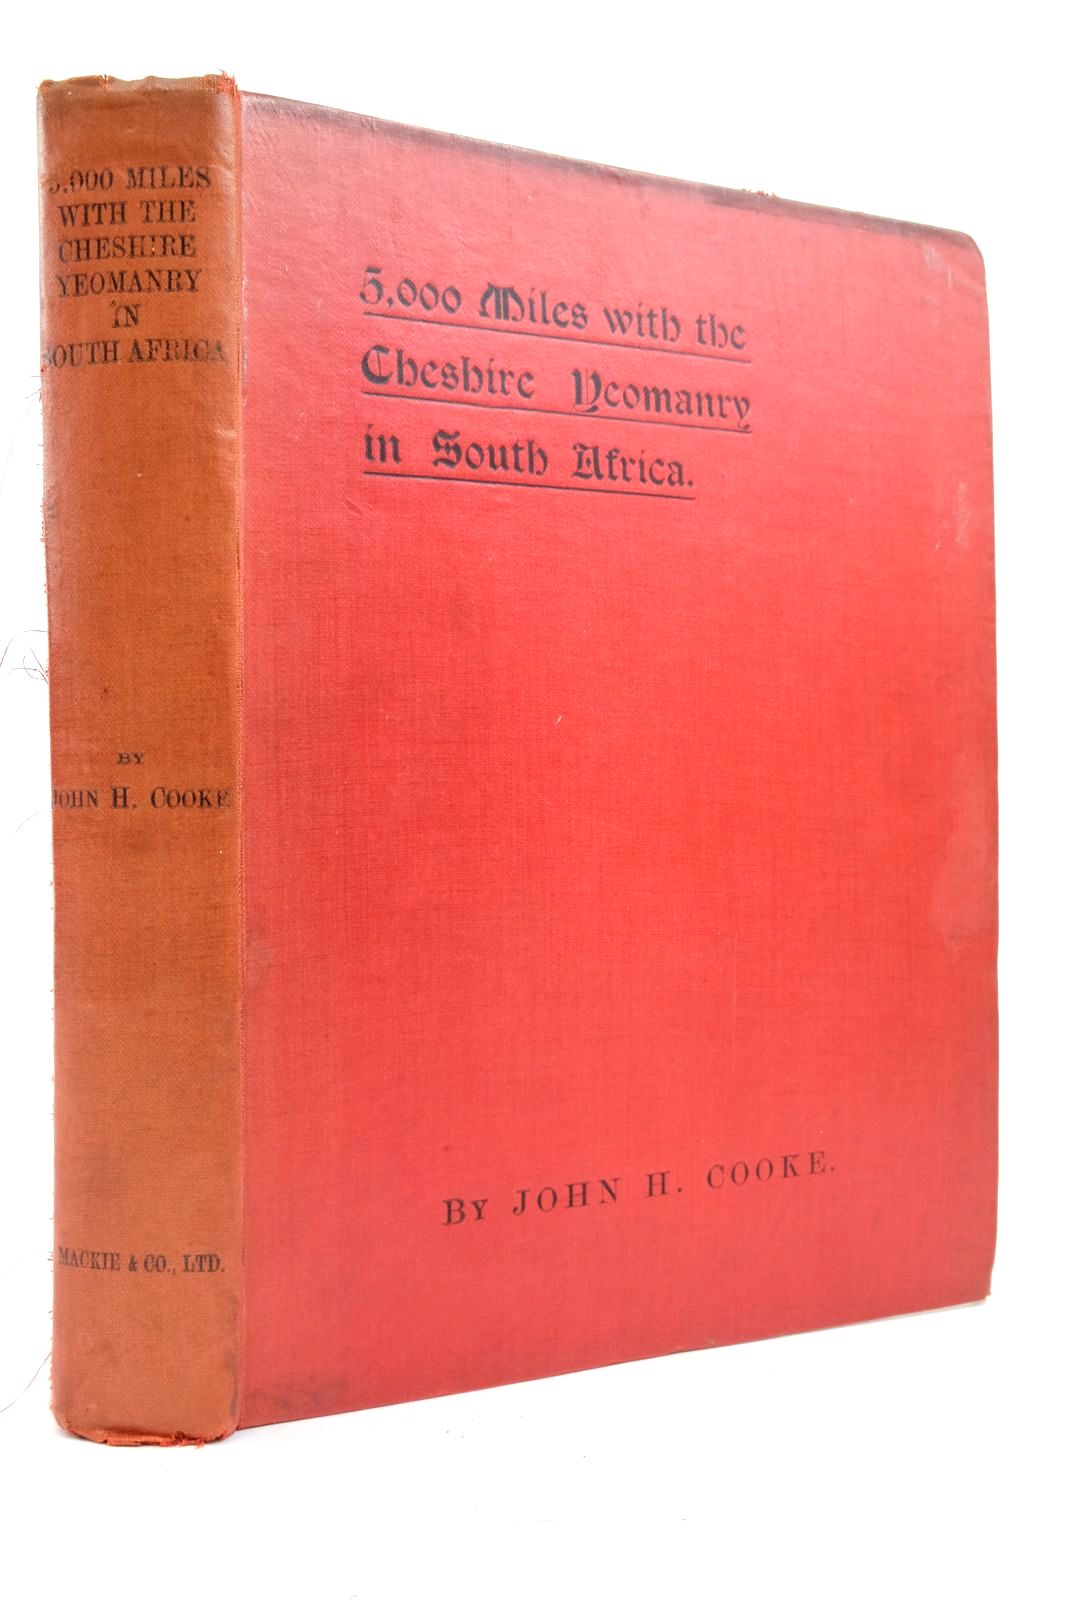 Photo of 5,000 MILES WITH THE CHESHIRE YEOMANRY IN SOUTH AFRICA written by Cooke, John H. published by Mackie &amp; Co. Limited (STOCK CODE: 2137729)  for sale by Stella & Rose's Books